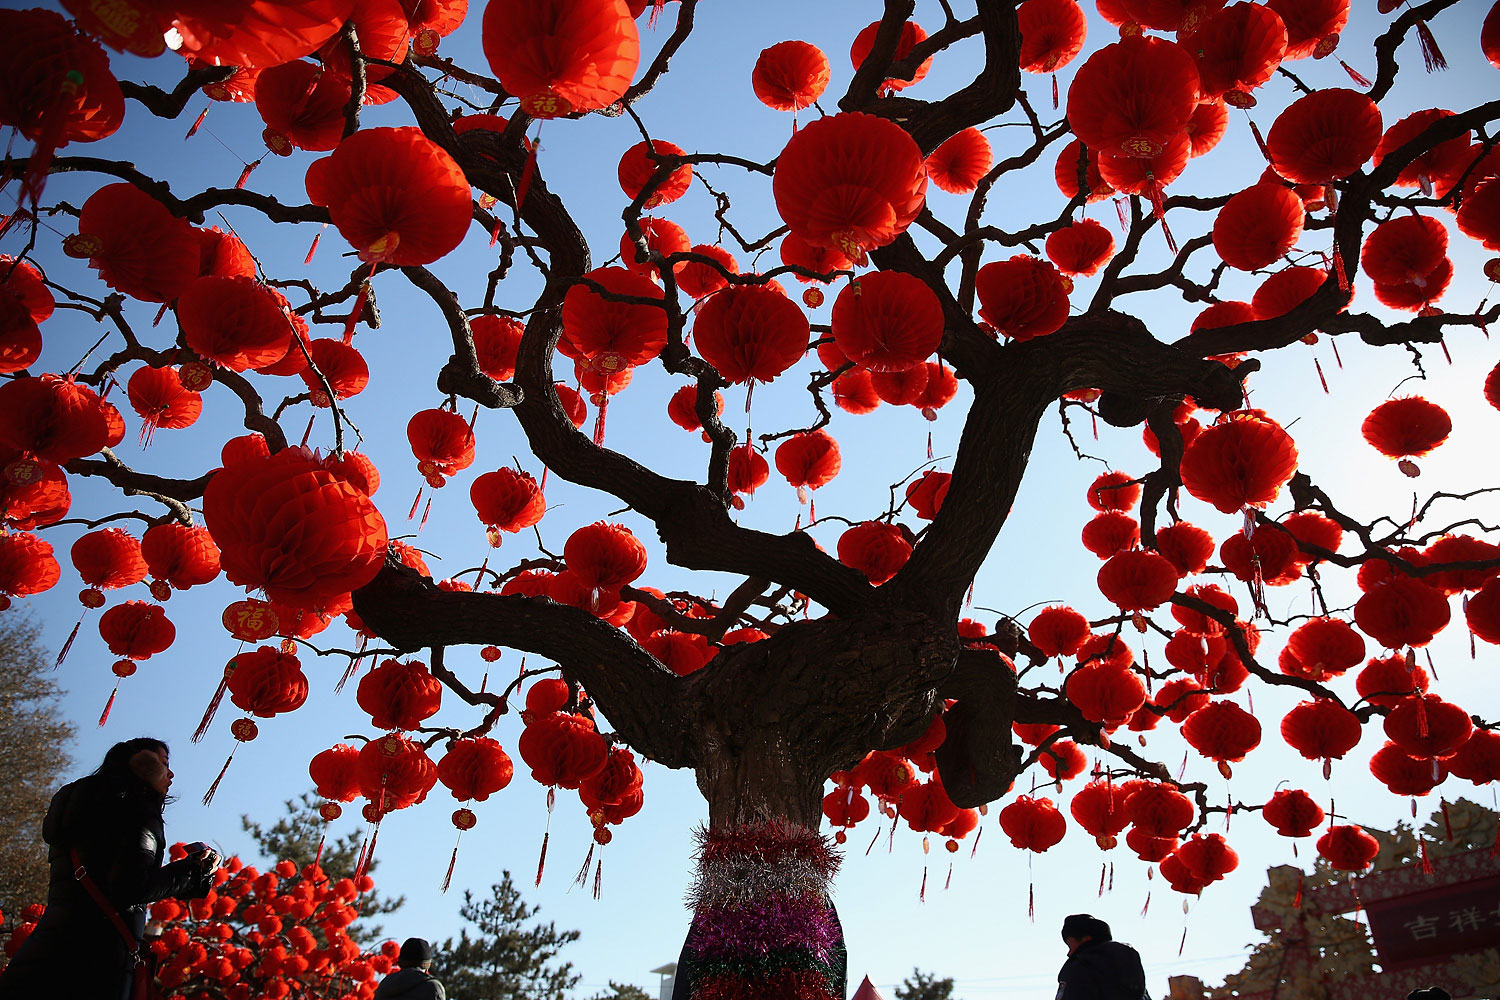 A Visitor passes the trees decorated with red lanterns at the Spring Festival Temple Fair for celebrating Chinese Lunar New Year of Horse at the Temple of Earth park on Jan. 30, 2014 in Beijing.